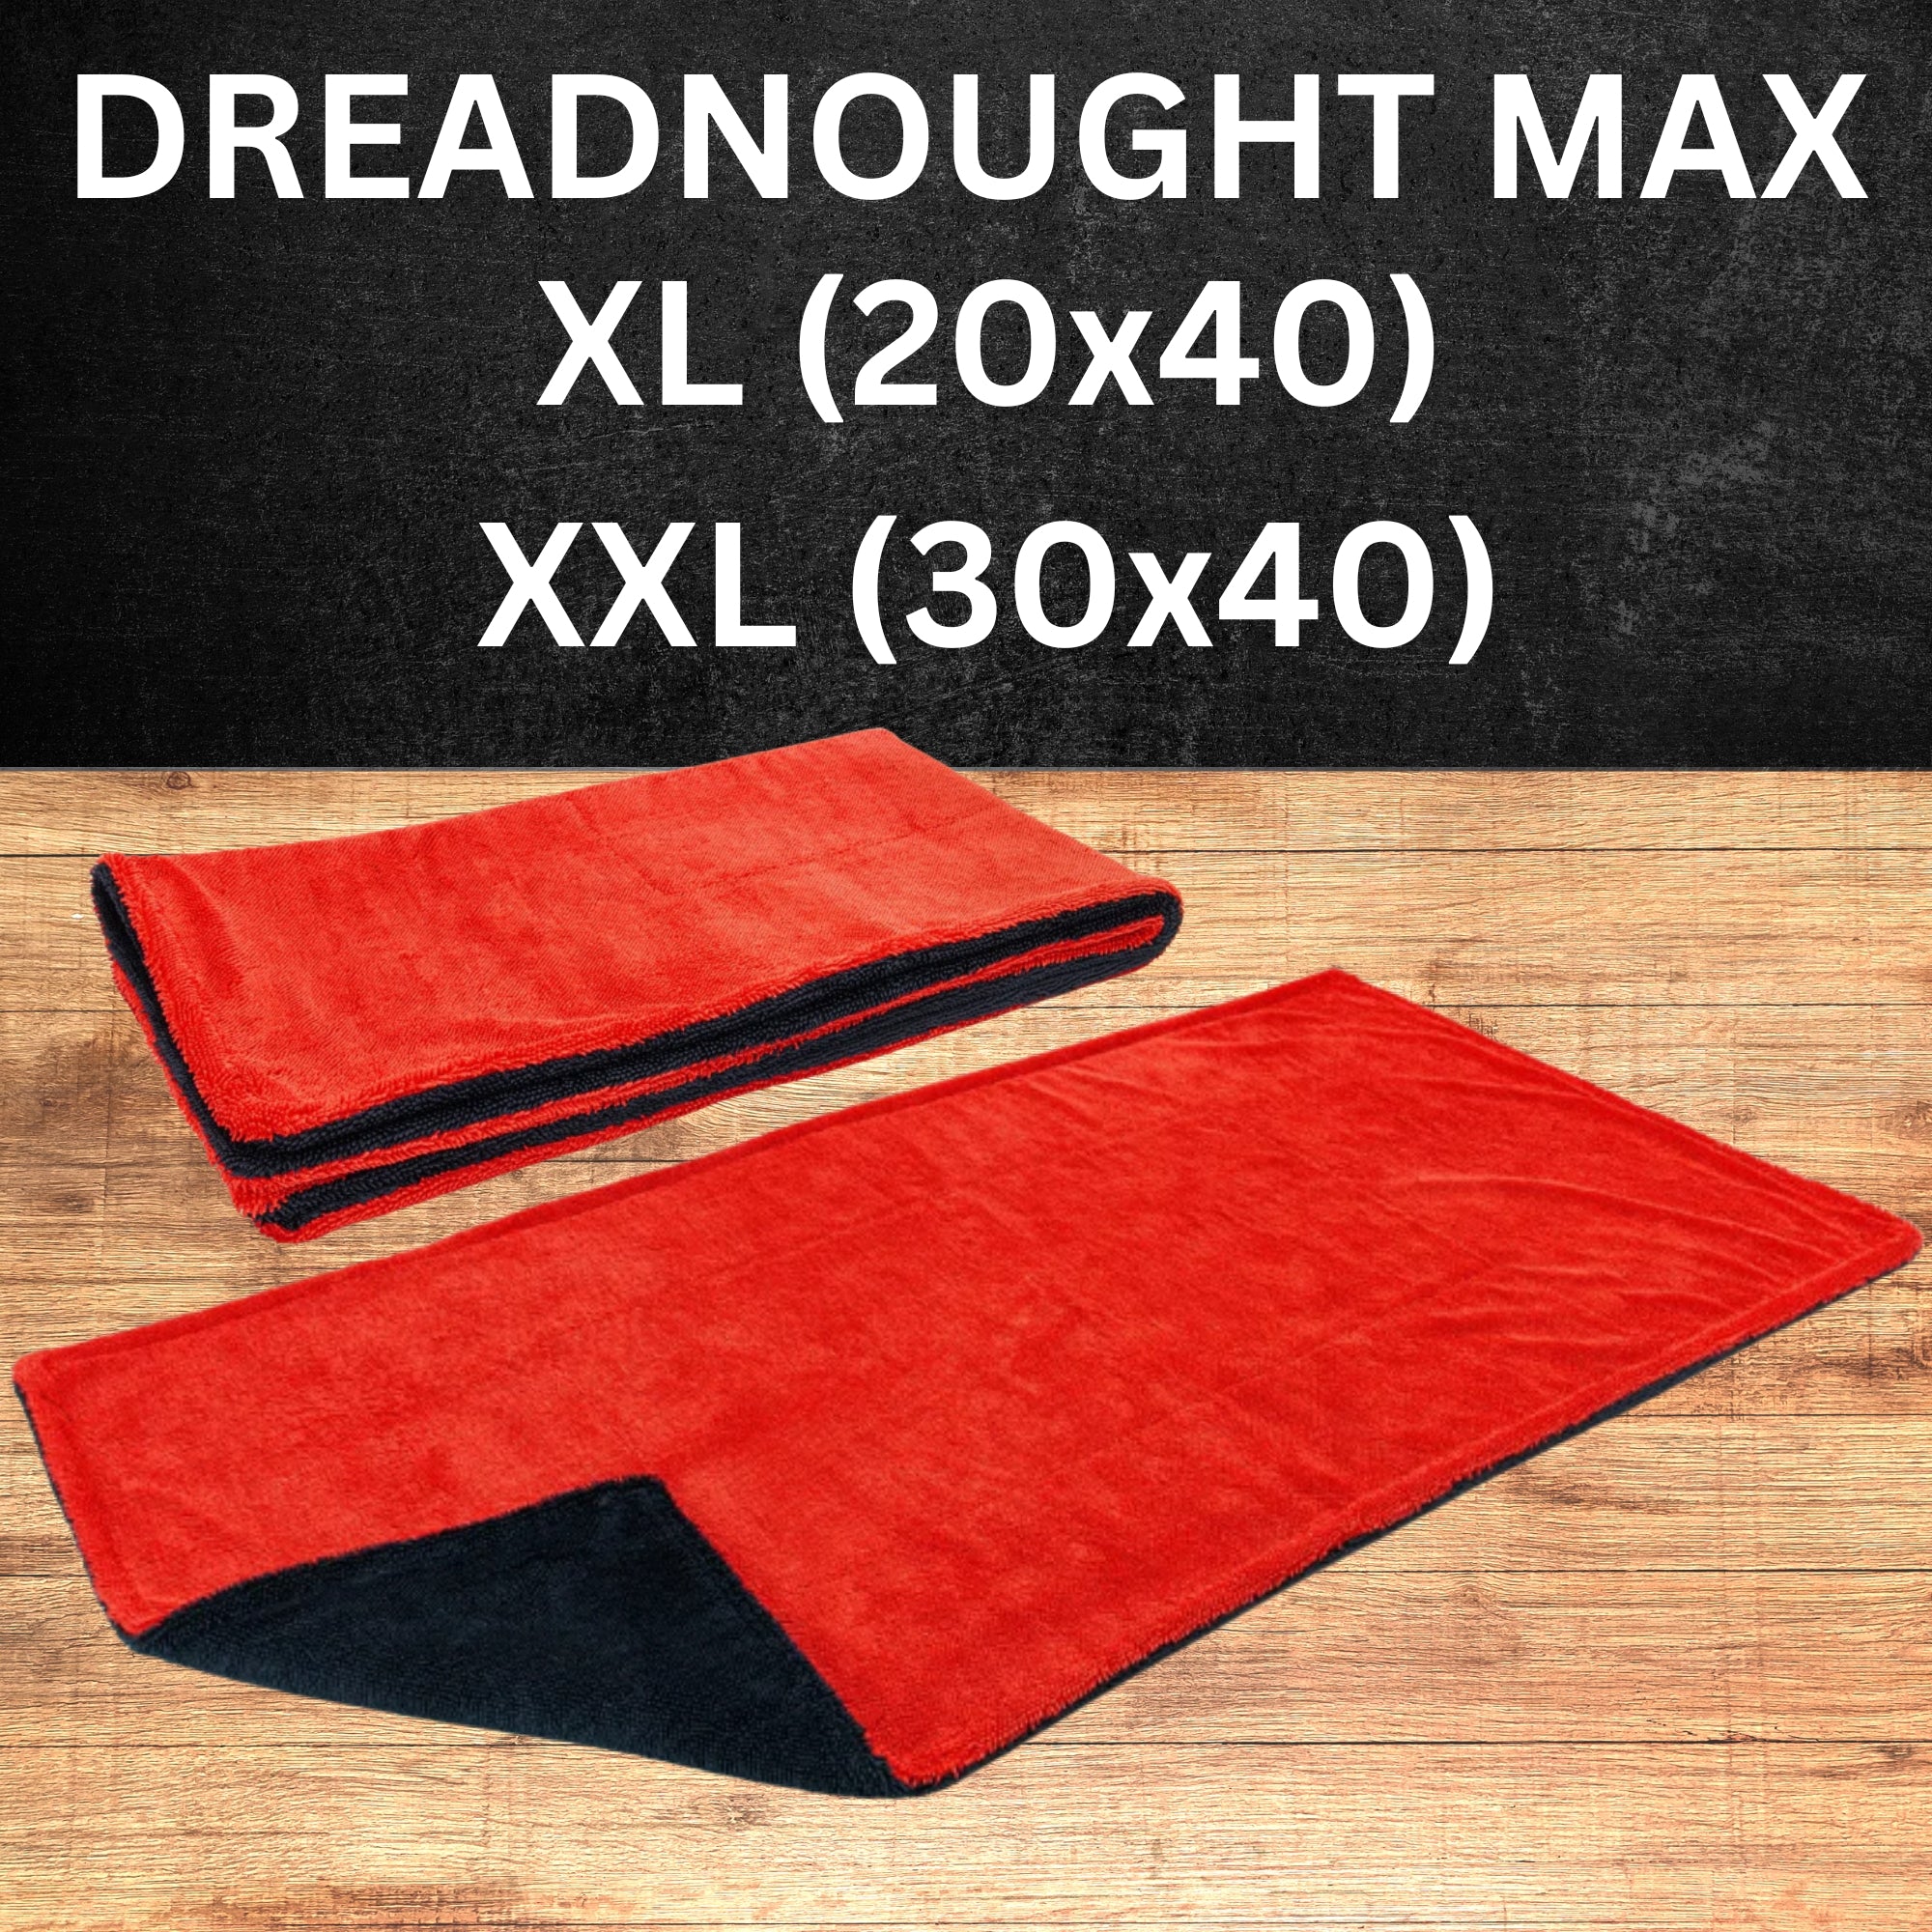 AutoFiber Dreadnought  THE BEST DRYING TOWEL HANDS DOWN!! 